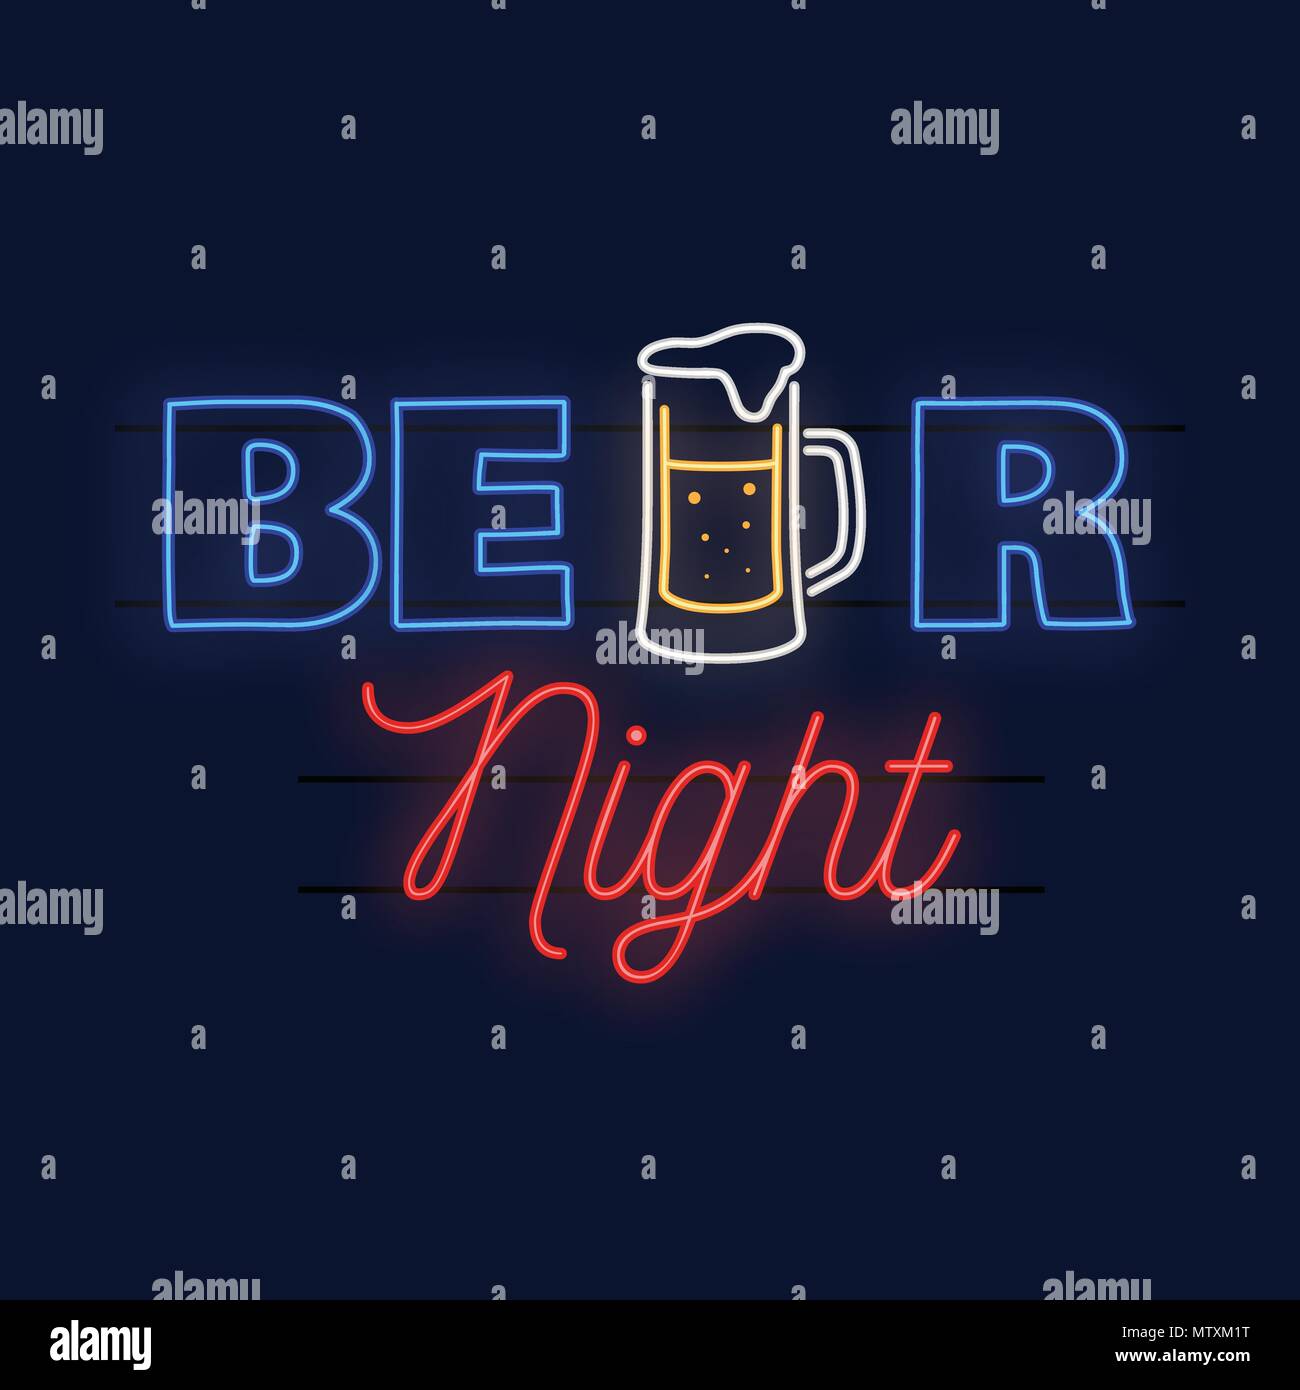 Beer night. Vector illustration. Neon design for bar, pub and restaurant business. Stock Vector